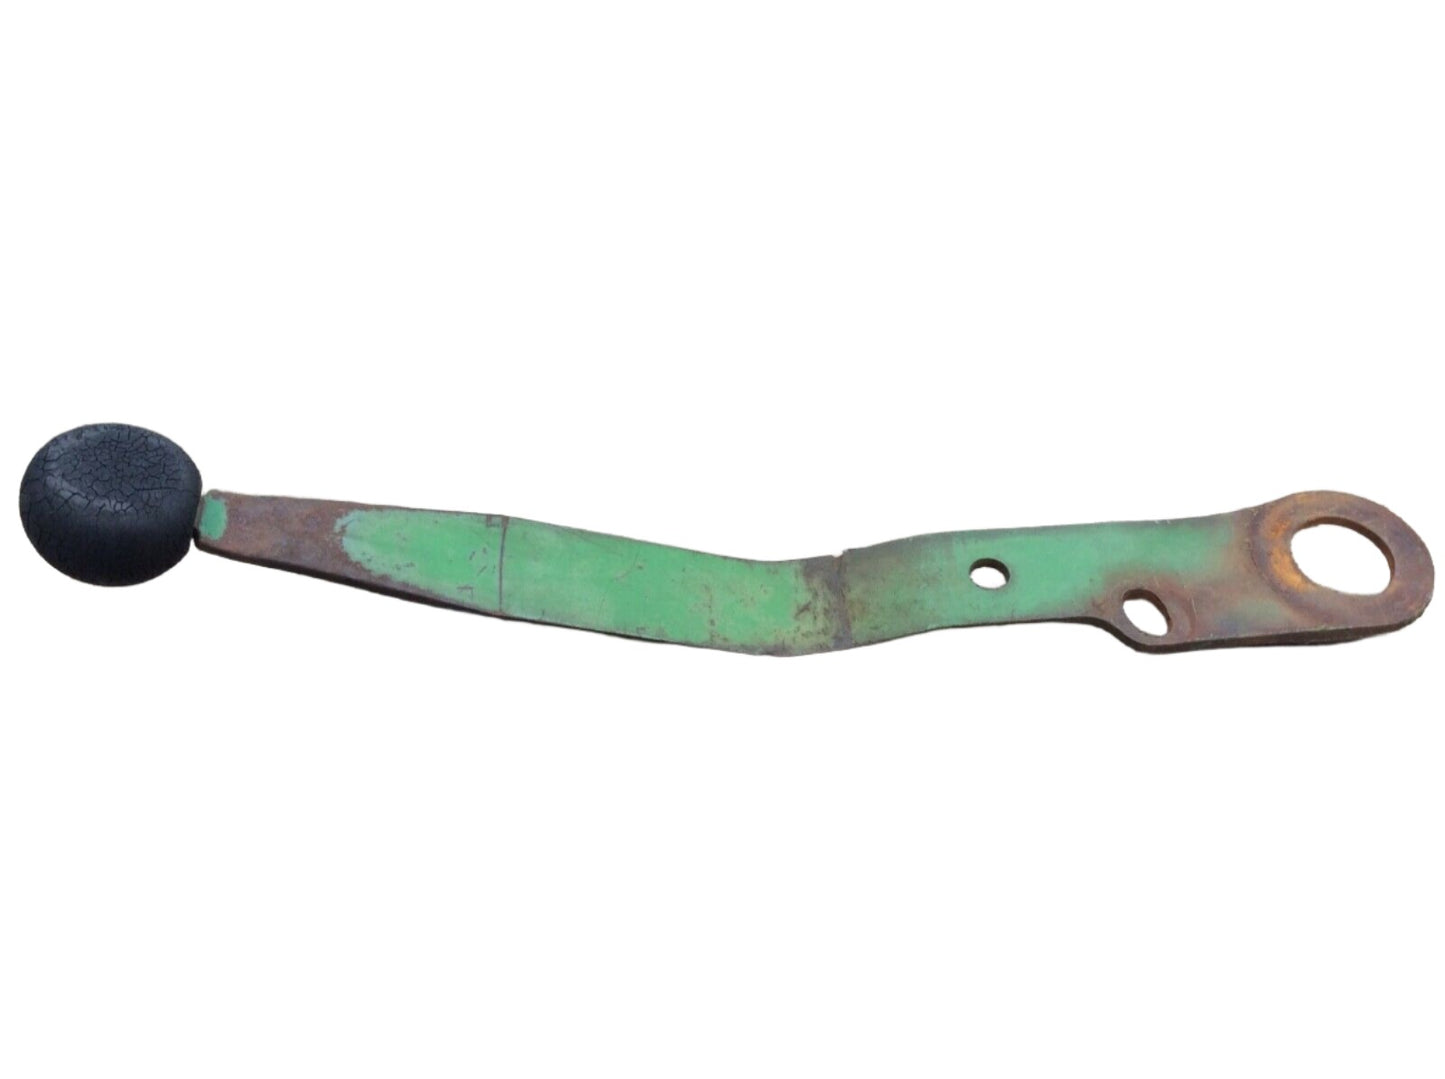 R34234 John Deere Selective Control Lever For 2510, 3020, 4020